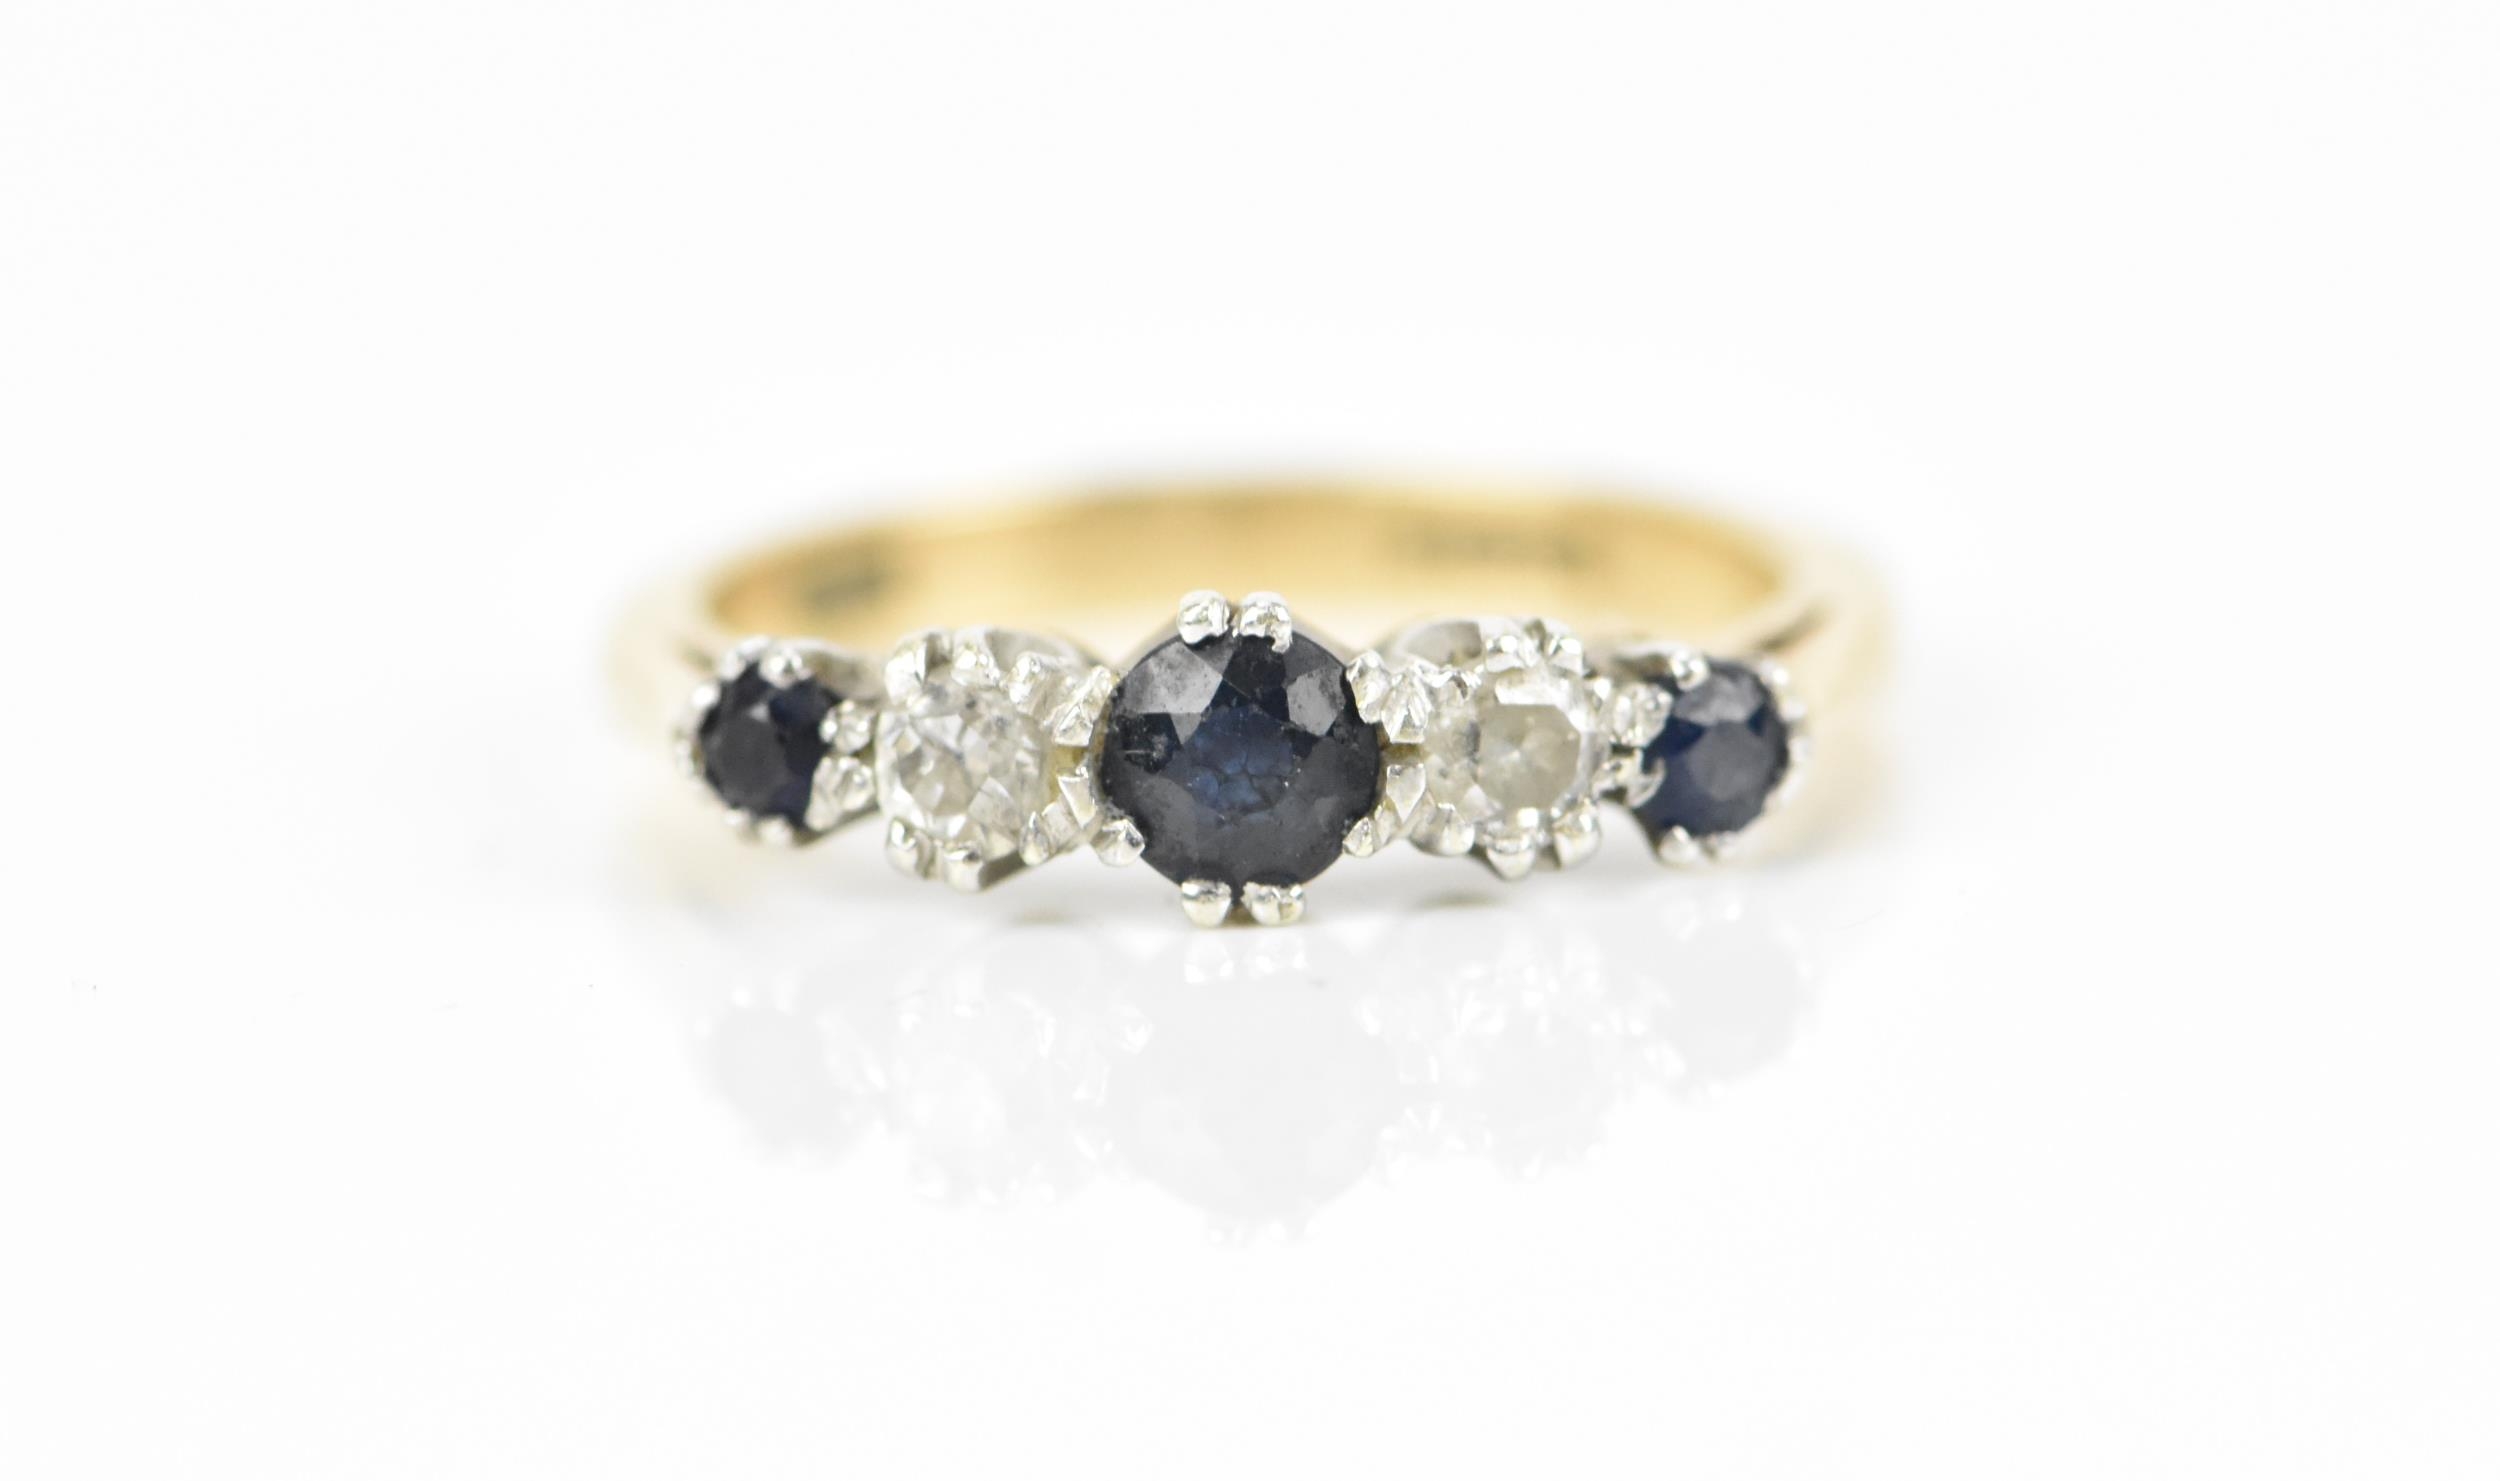 A 9ct yellow gold, diamond and blue sapphire five stone ring, designed with alternated and graduated